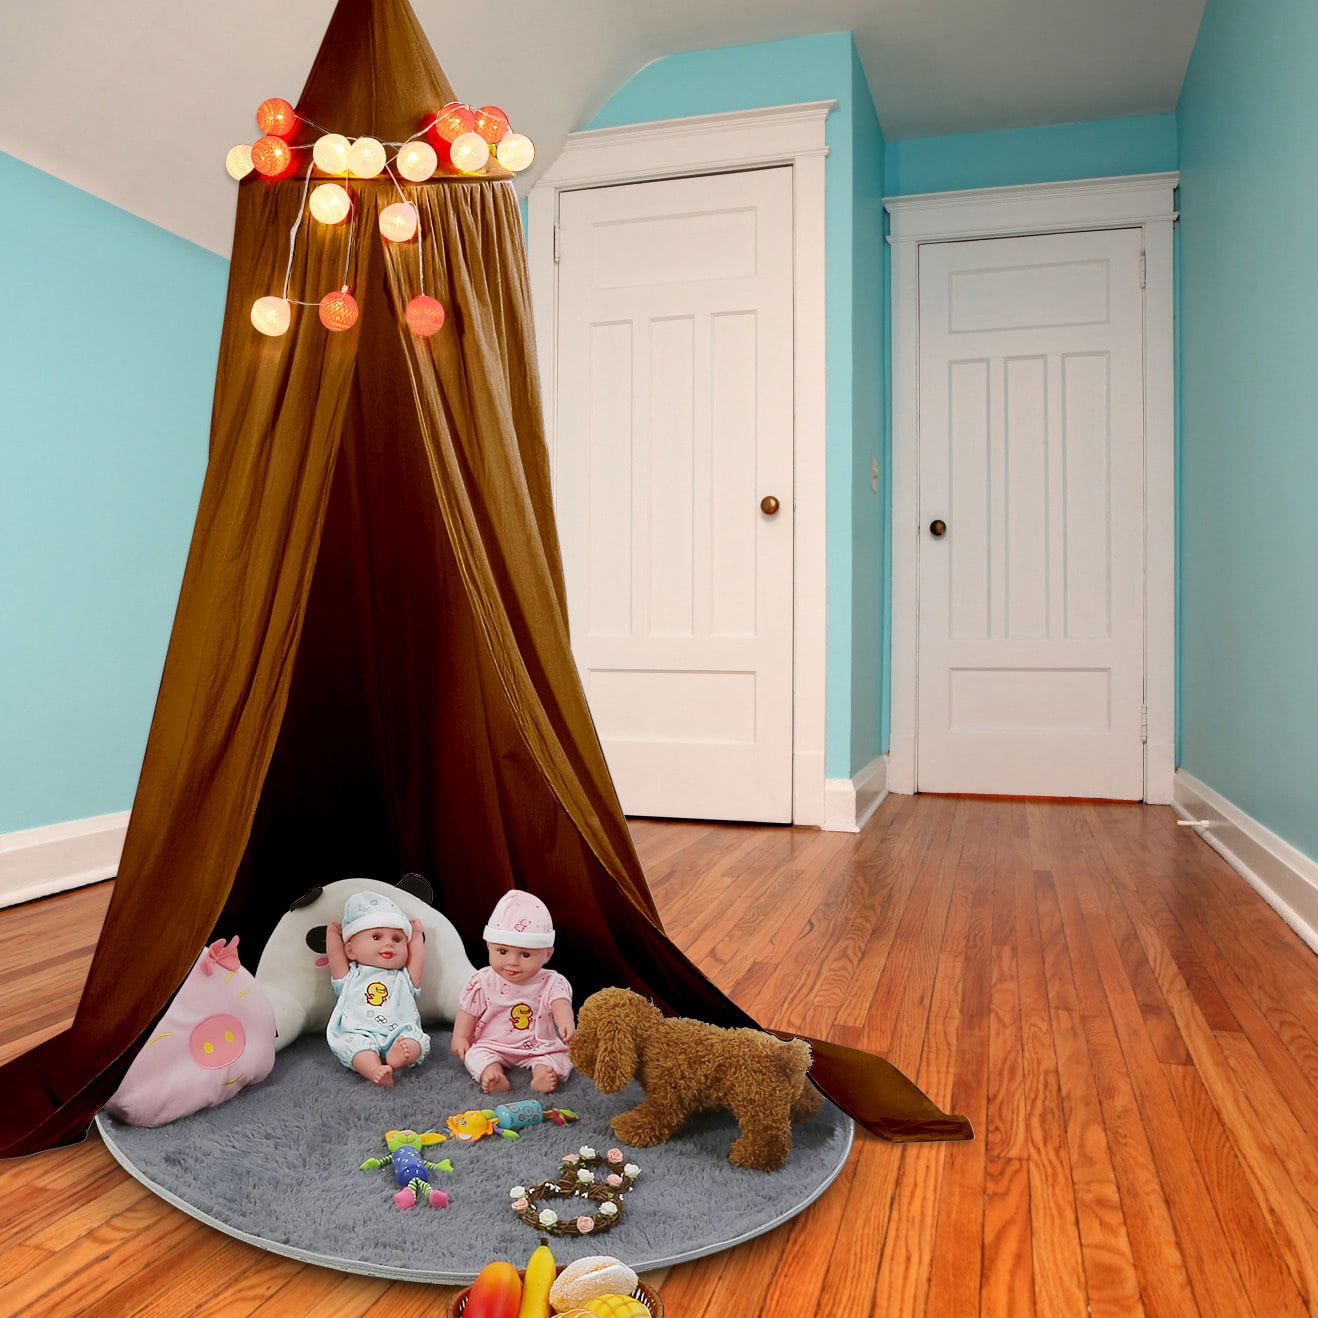 Mgaxyff Multicolor Round Dome Hanging Bed Canopy Mosquito ...